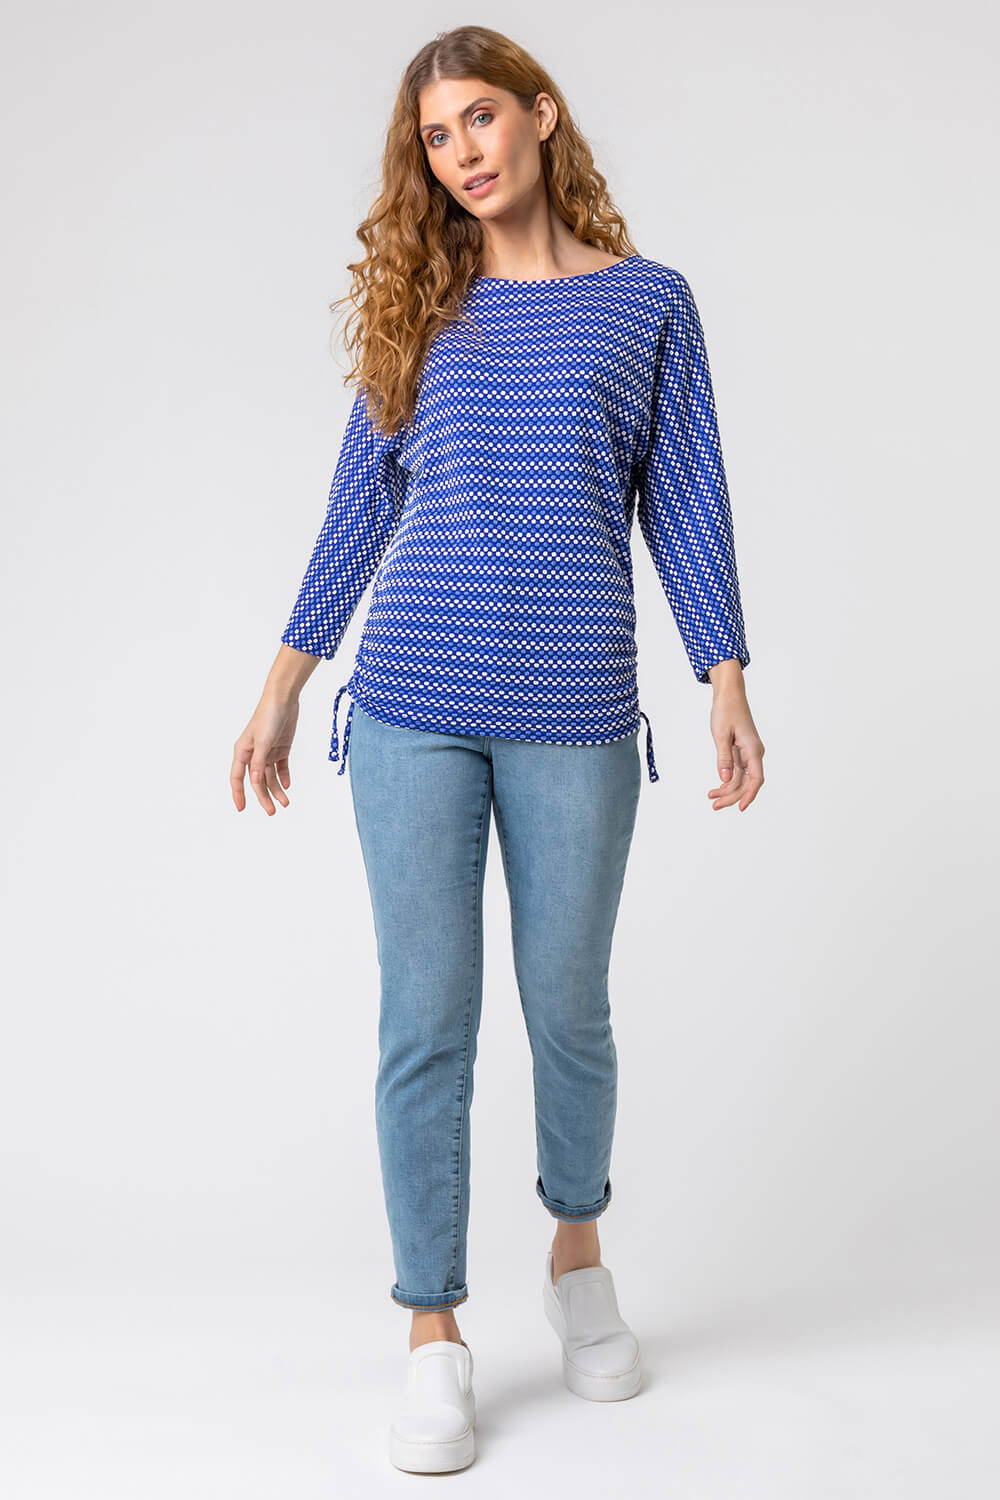 Royal Blue Textured Spot Print Stretch Top, Image 3 of 4